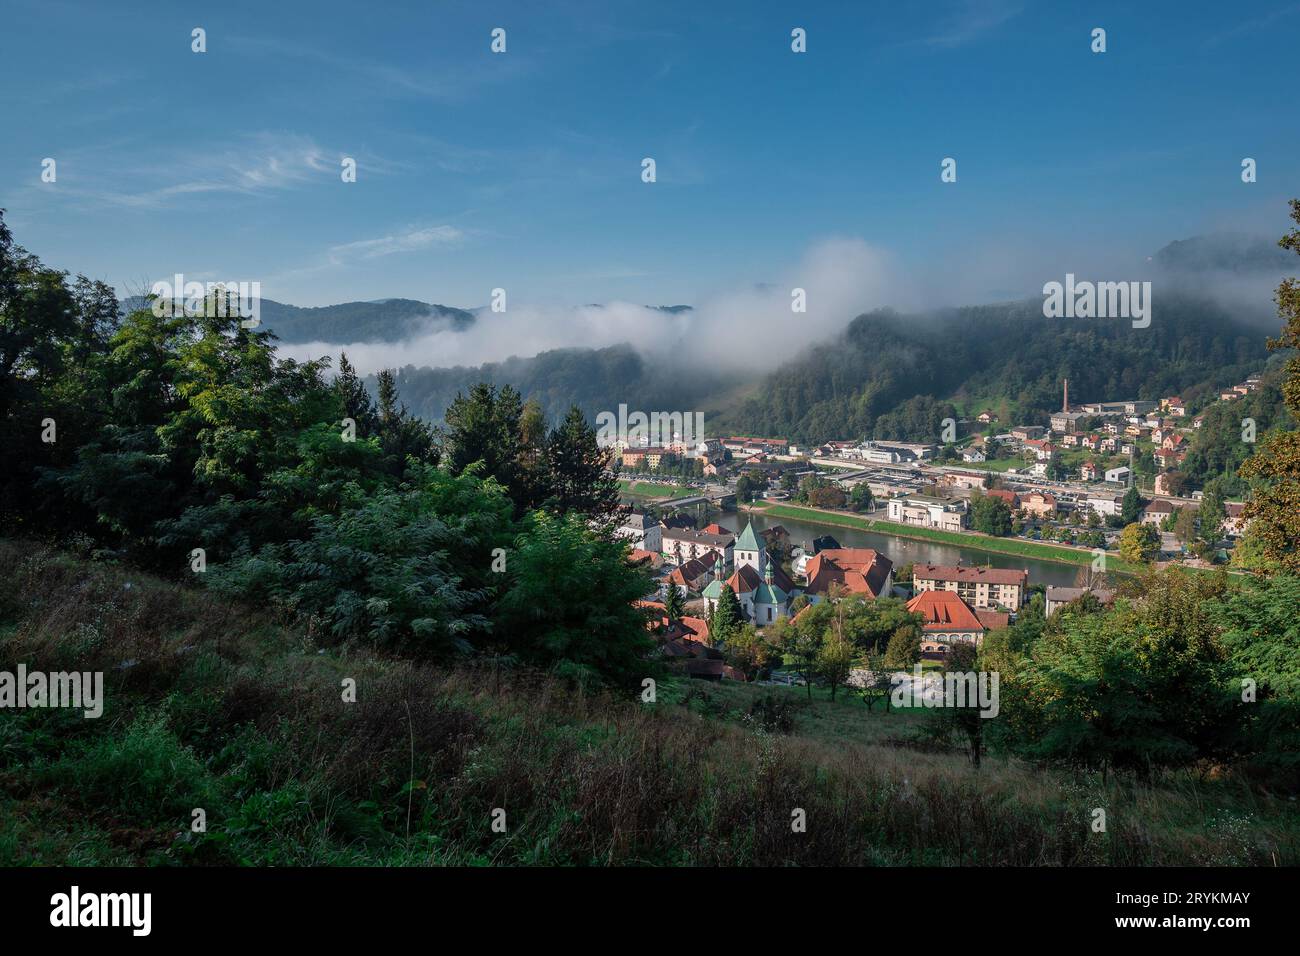 Panorama of the city of Lasko, known for its thermal baths and beer brewing. Viewed from the caste hill looking below. Stock Photo